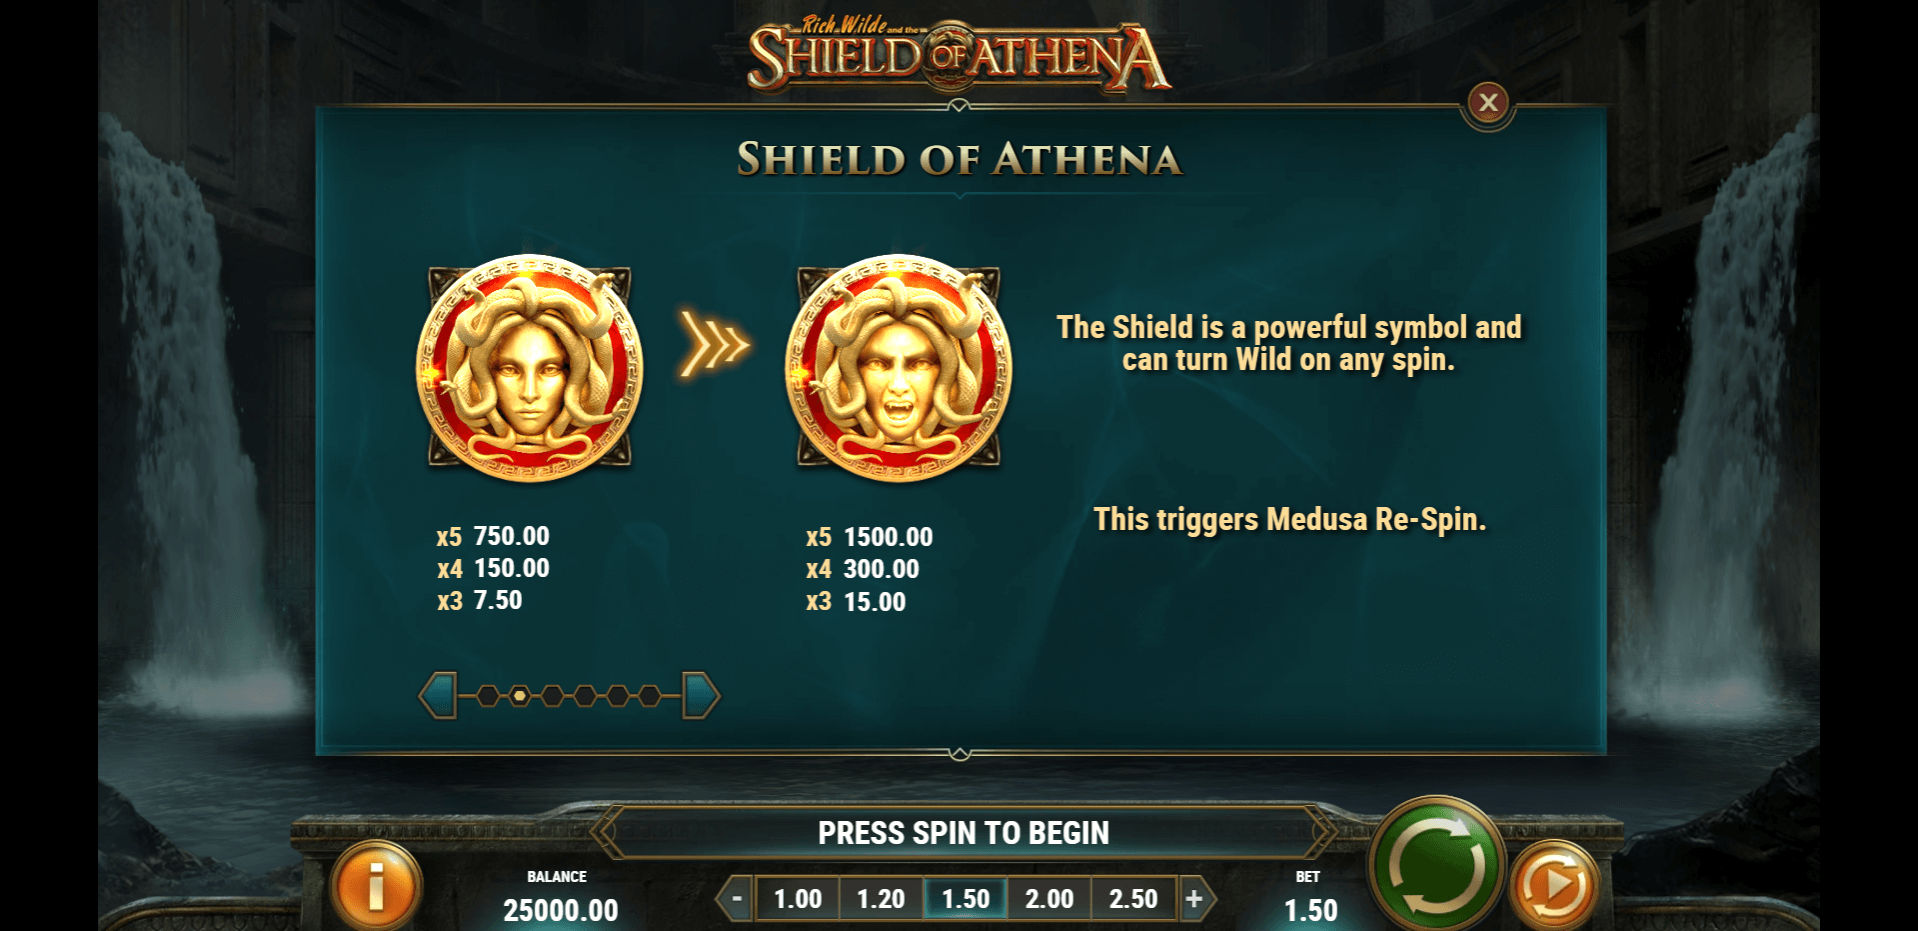 rich wilde and the shield of athena slot machine detail image 1